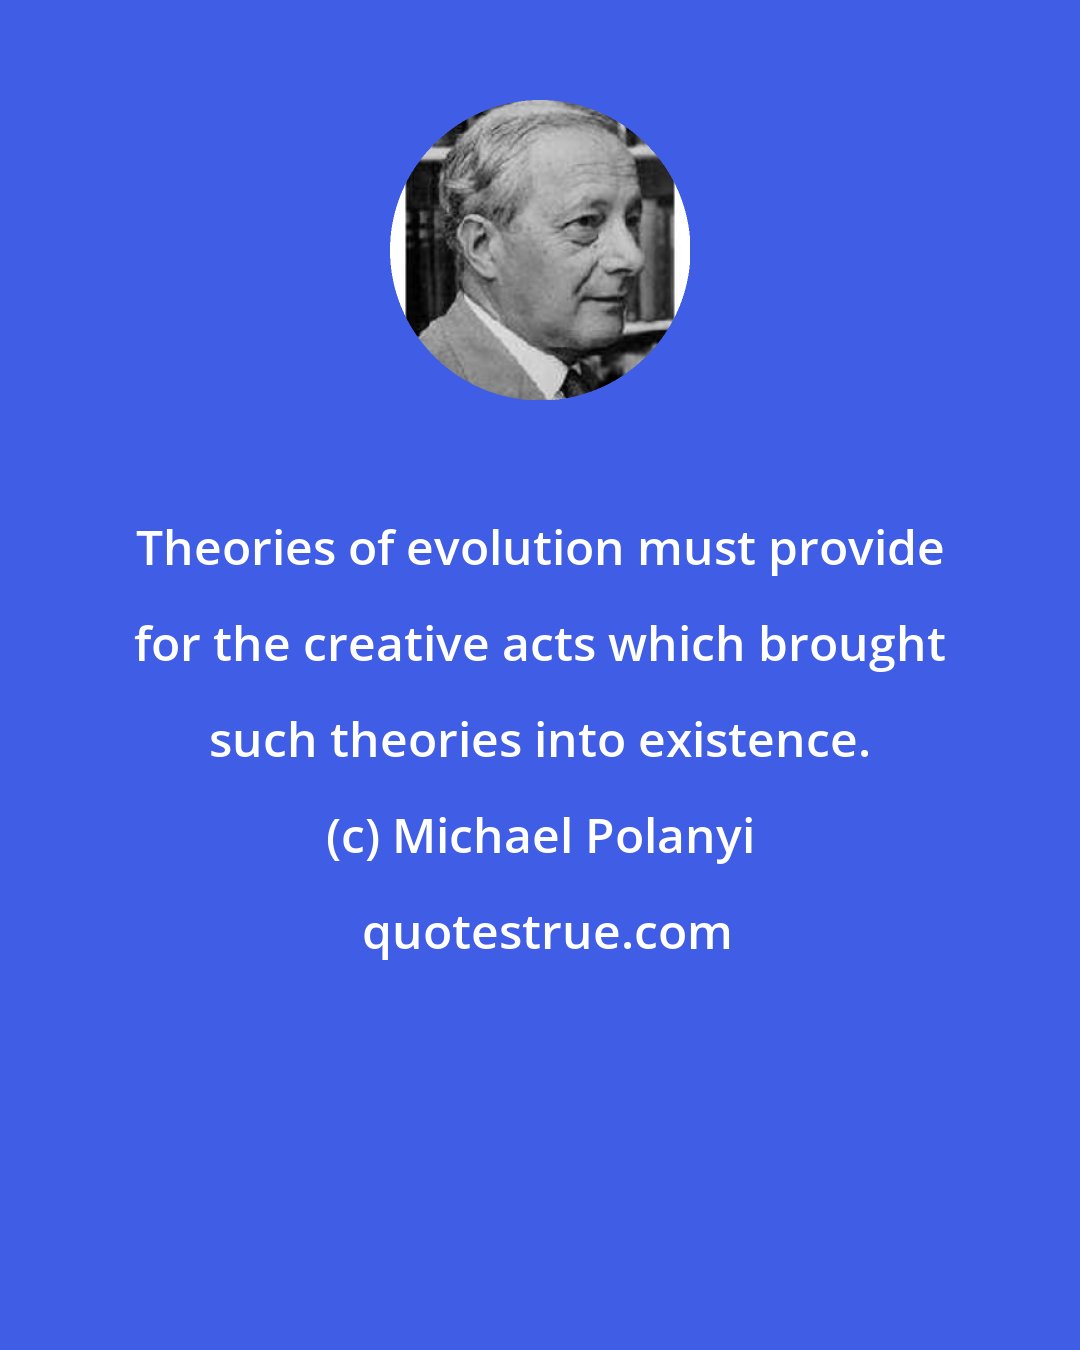 Michael Polanyi: Theories of evolution must provide for the creative acts which brought such theories into existence.